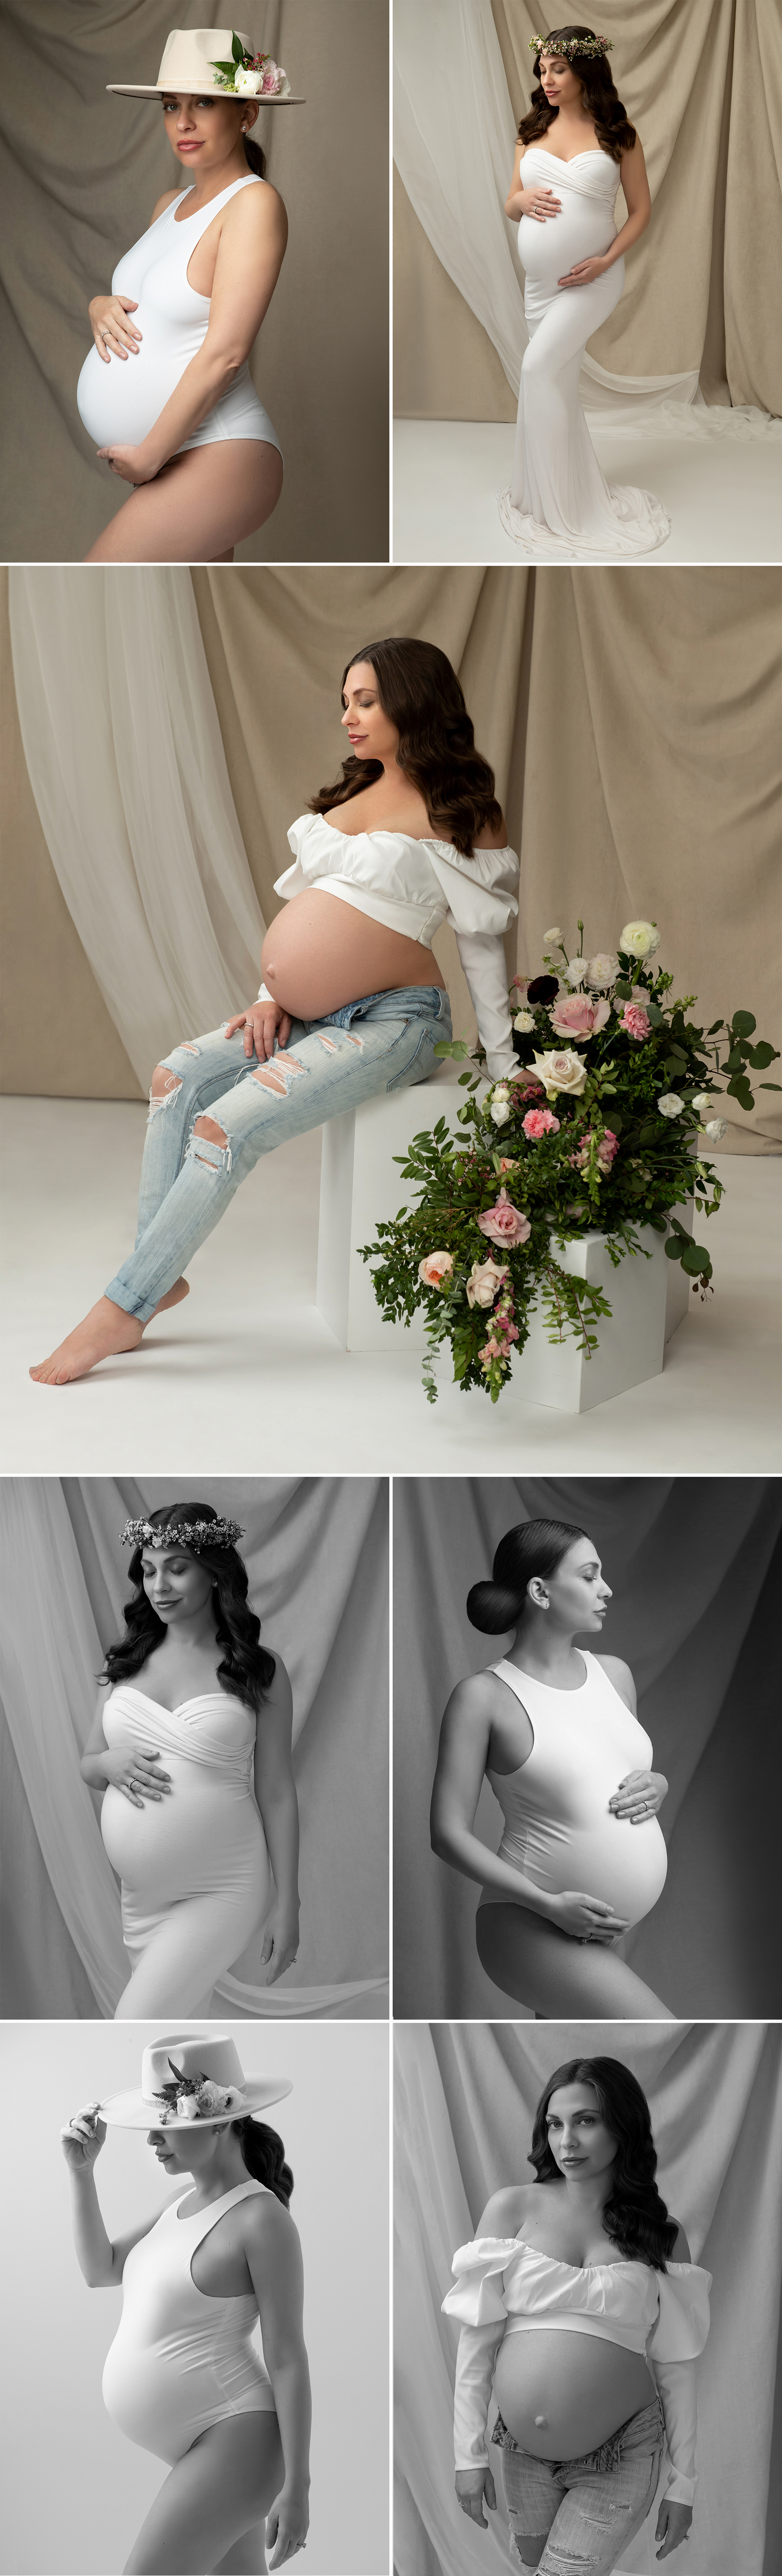 nyc maternity photoshoot creative floral